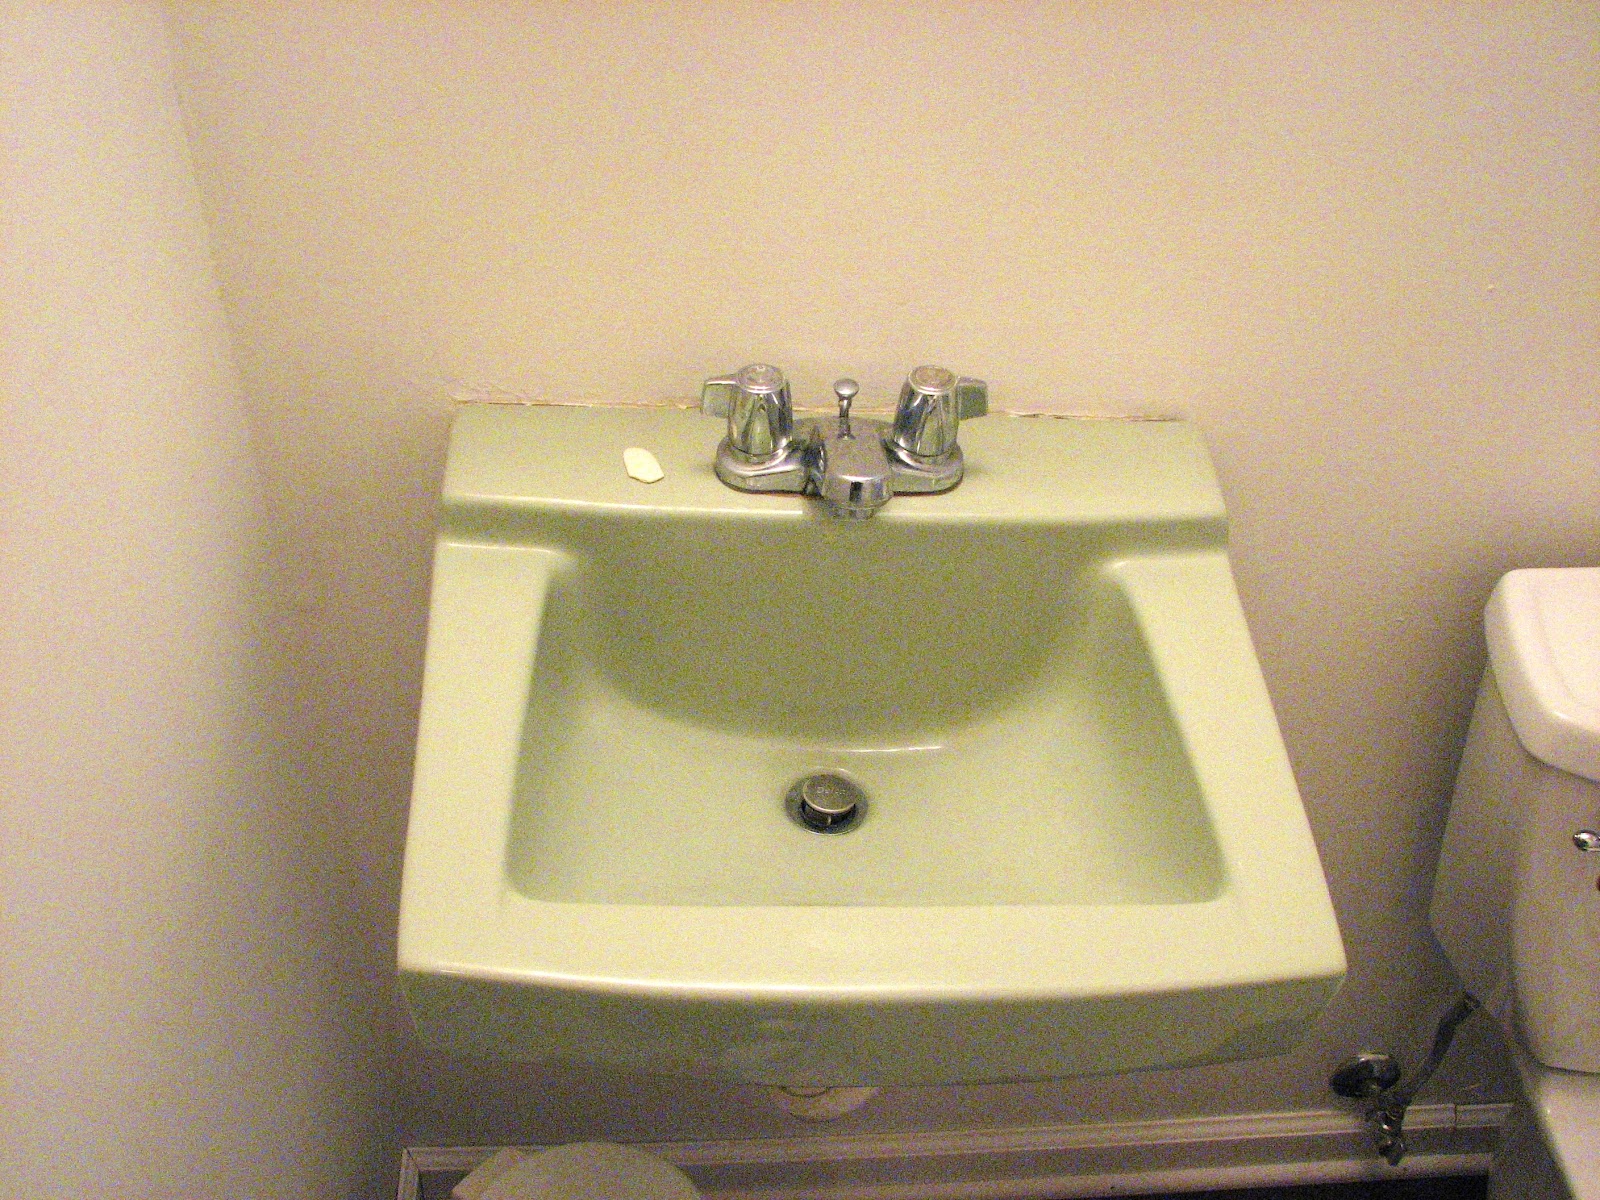 70's old bathroom sink replace with new